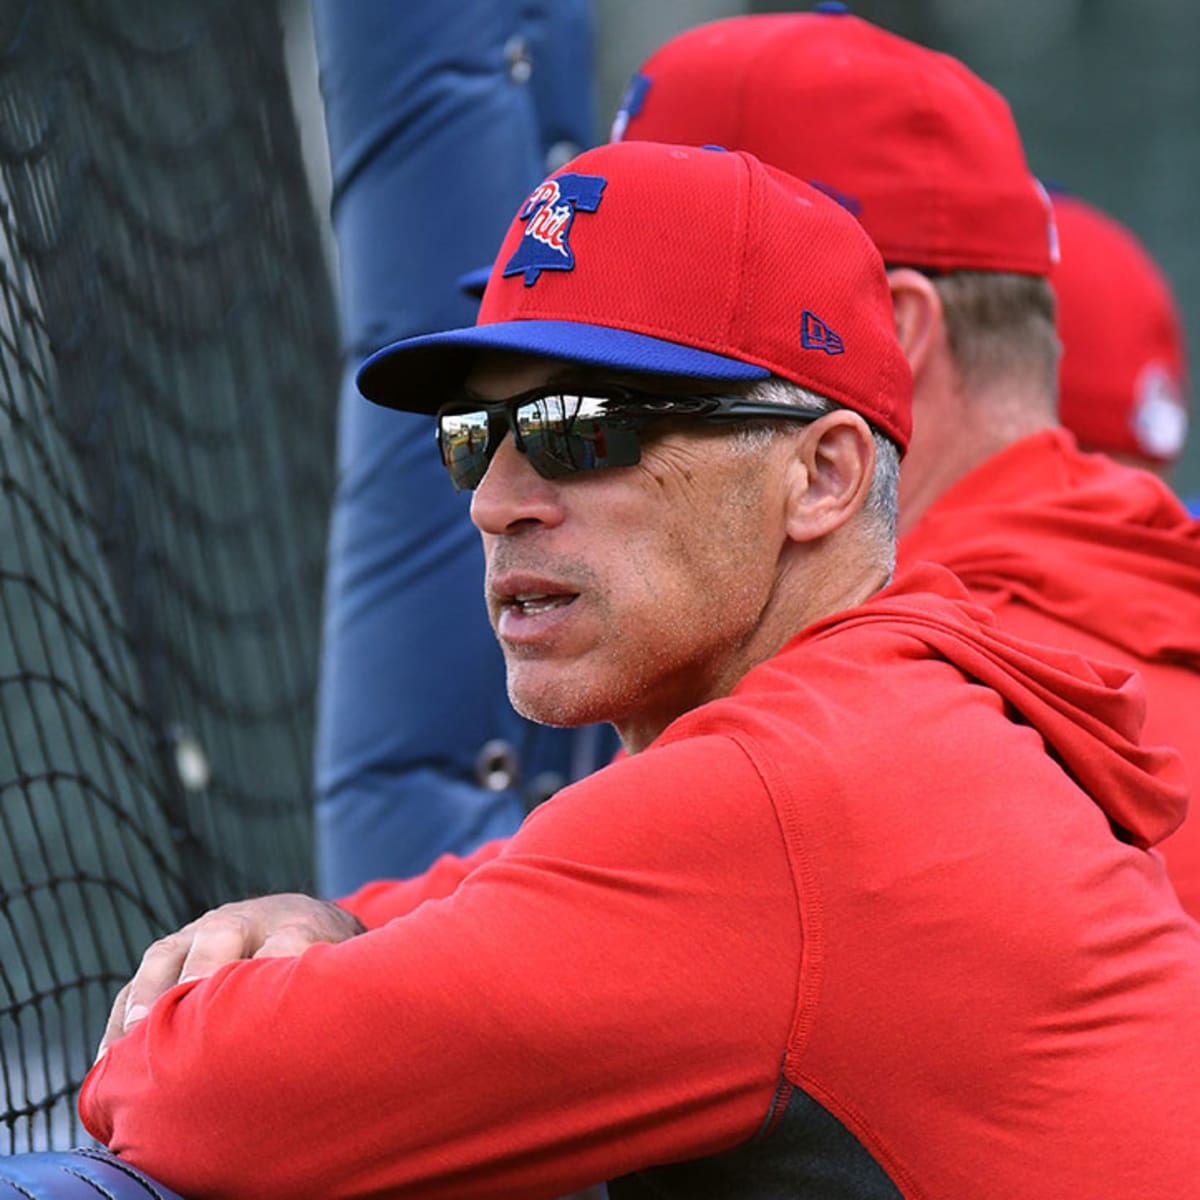 For now, Joe Girardi's job is reportedly safe